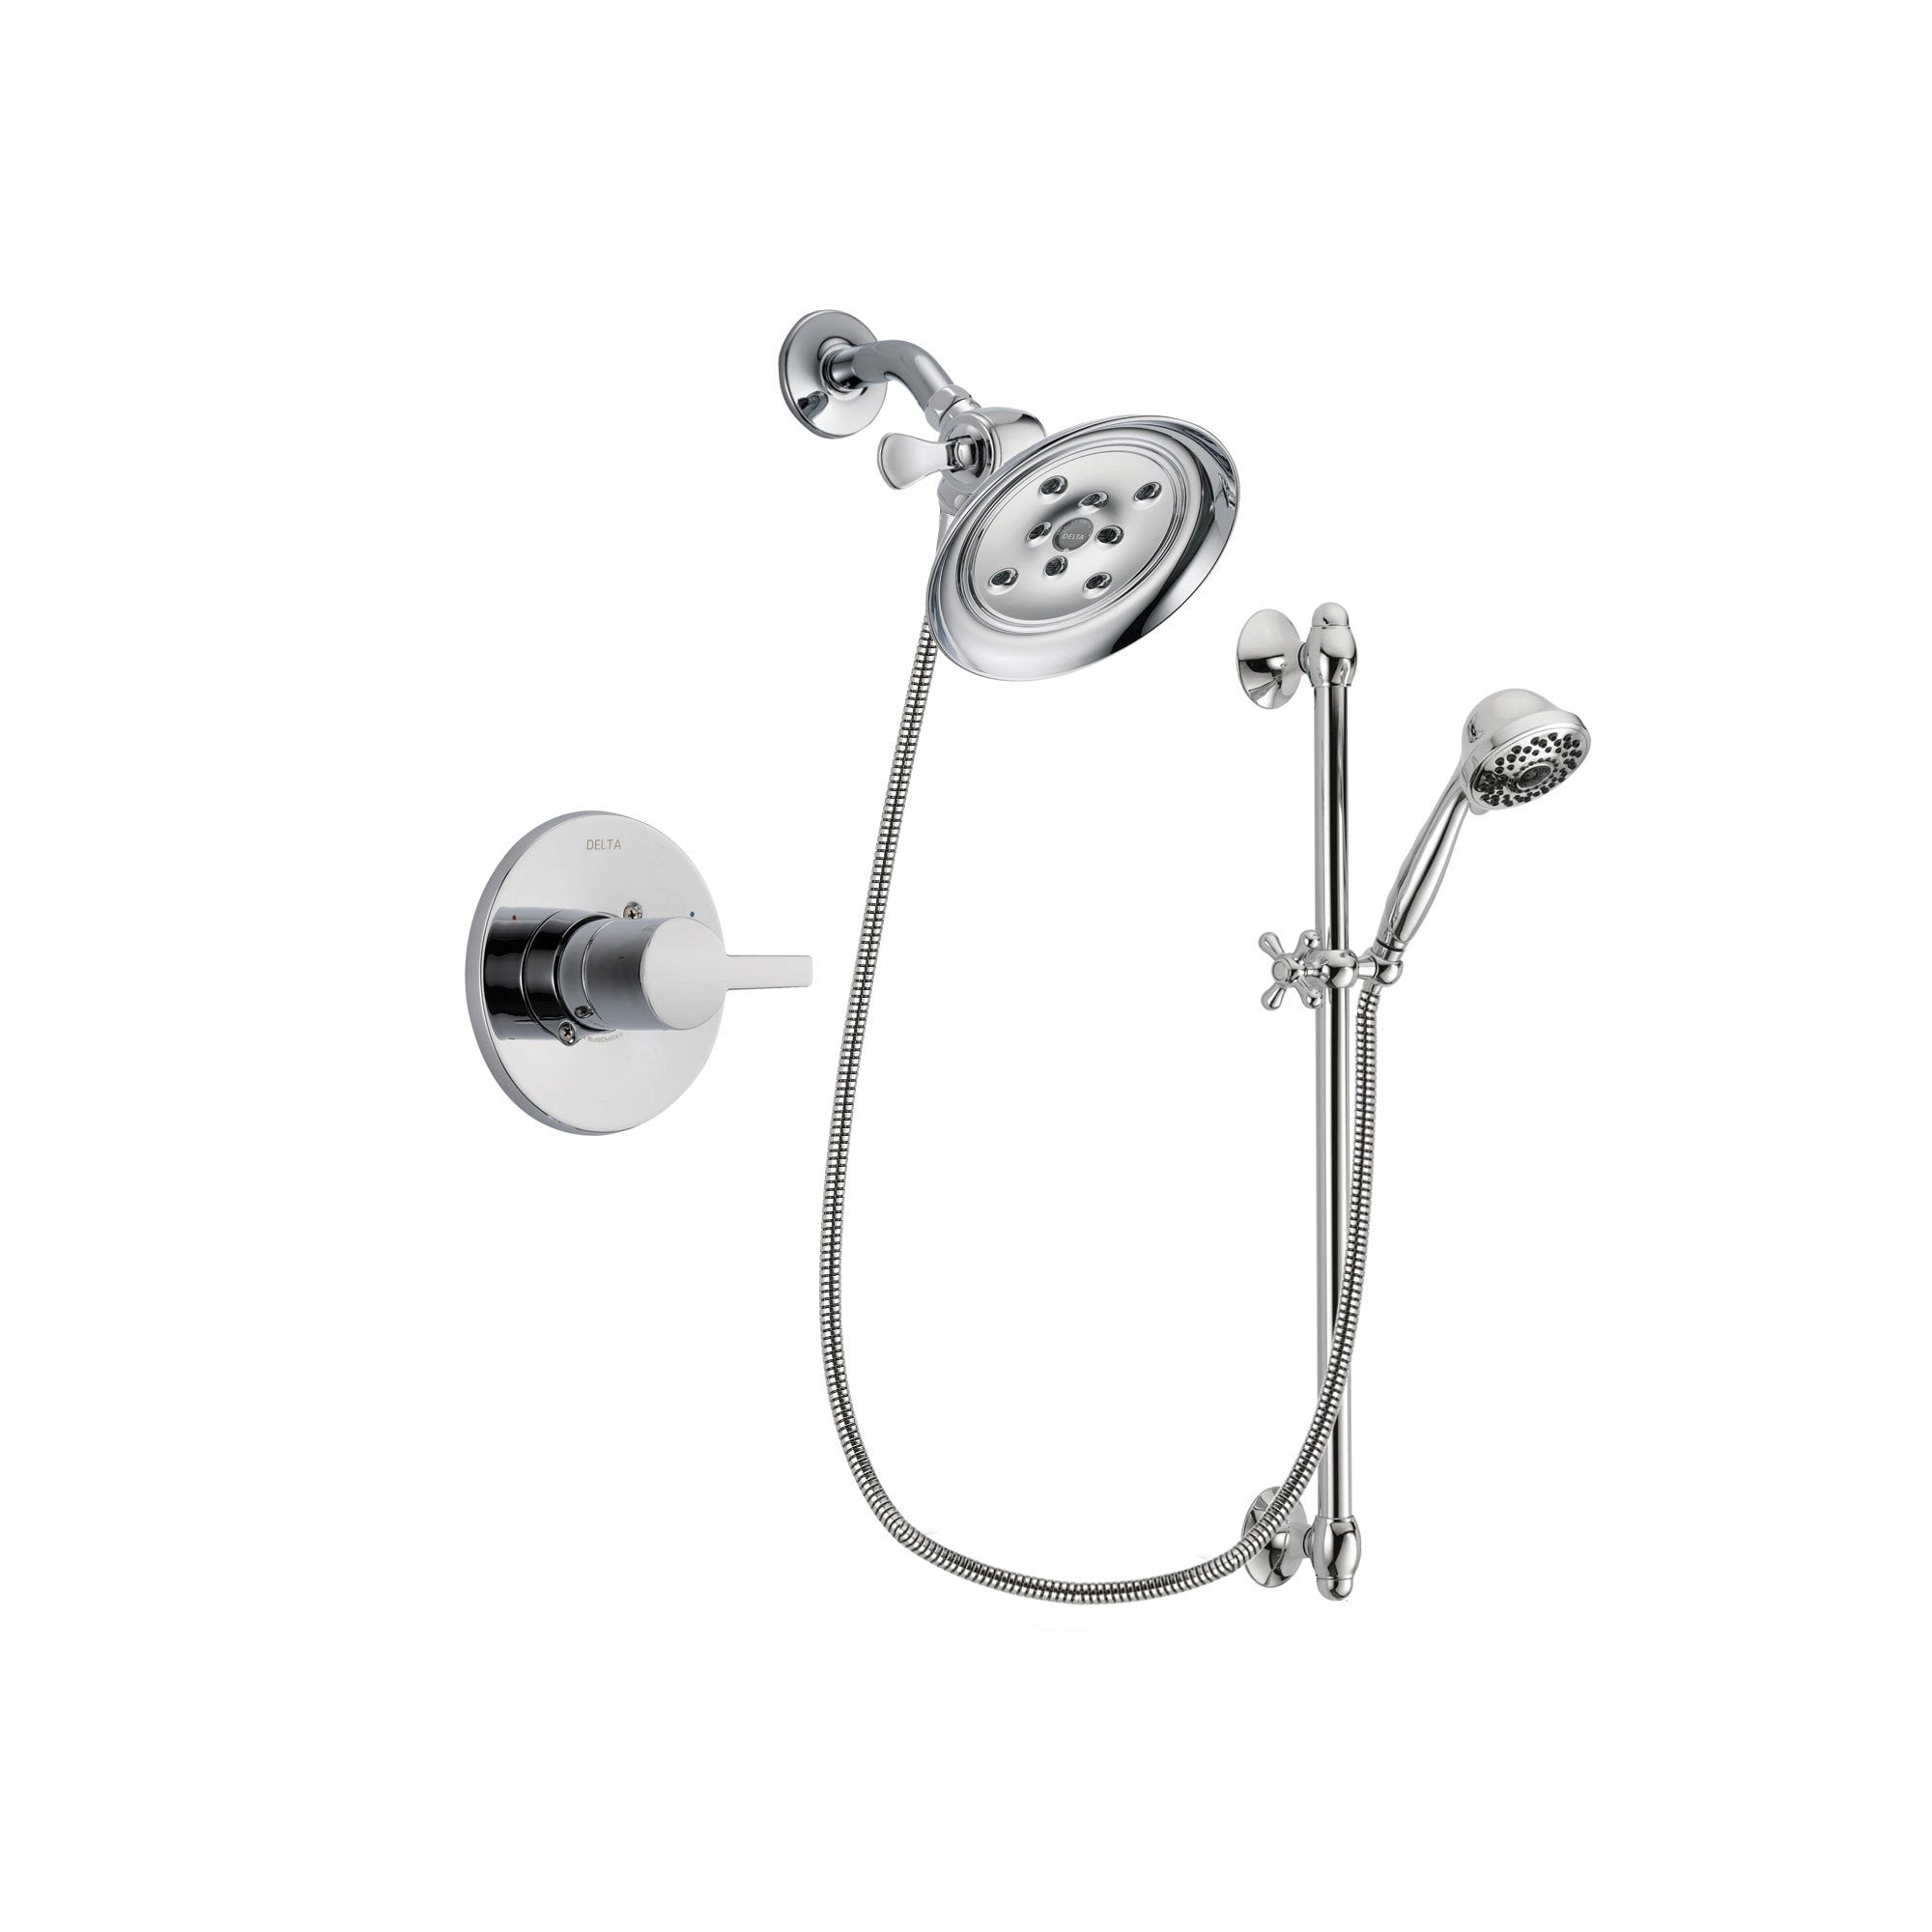 Delta Compel Chrome Shower Faucet System w/ Shower Head and Hand Shower DSP0644V